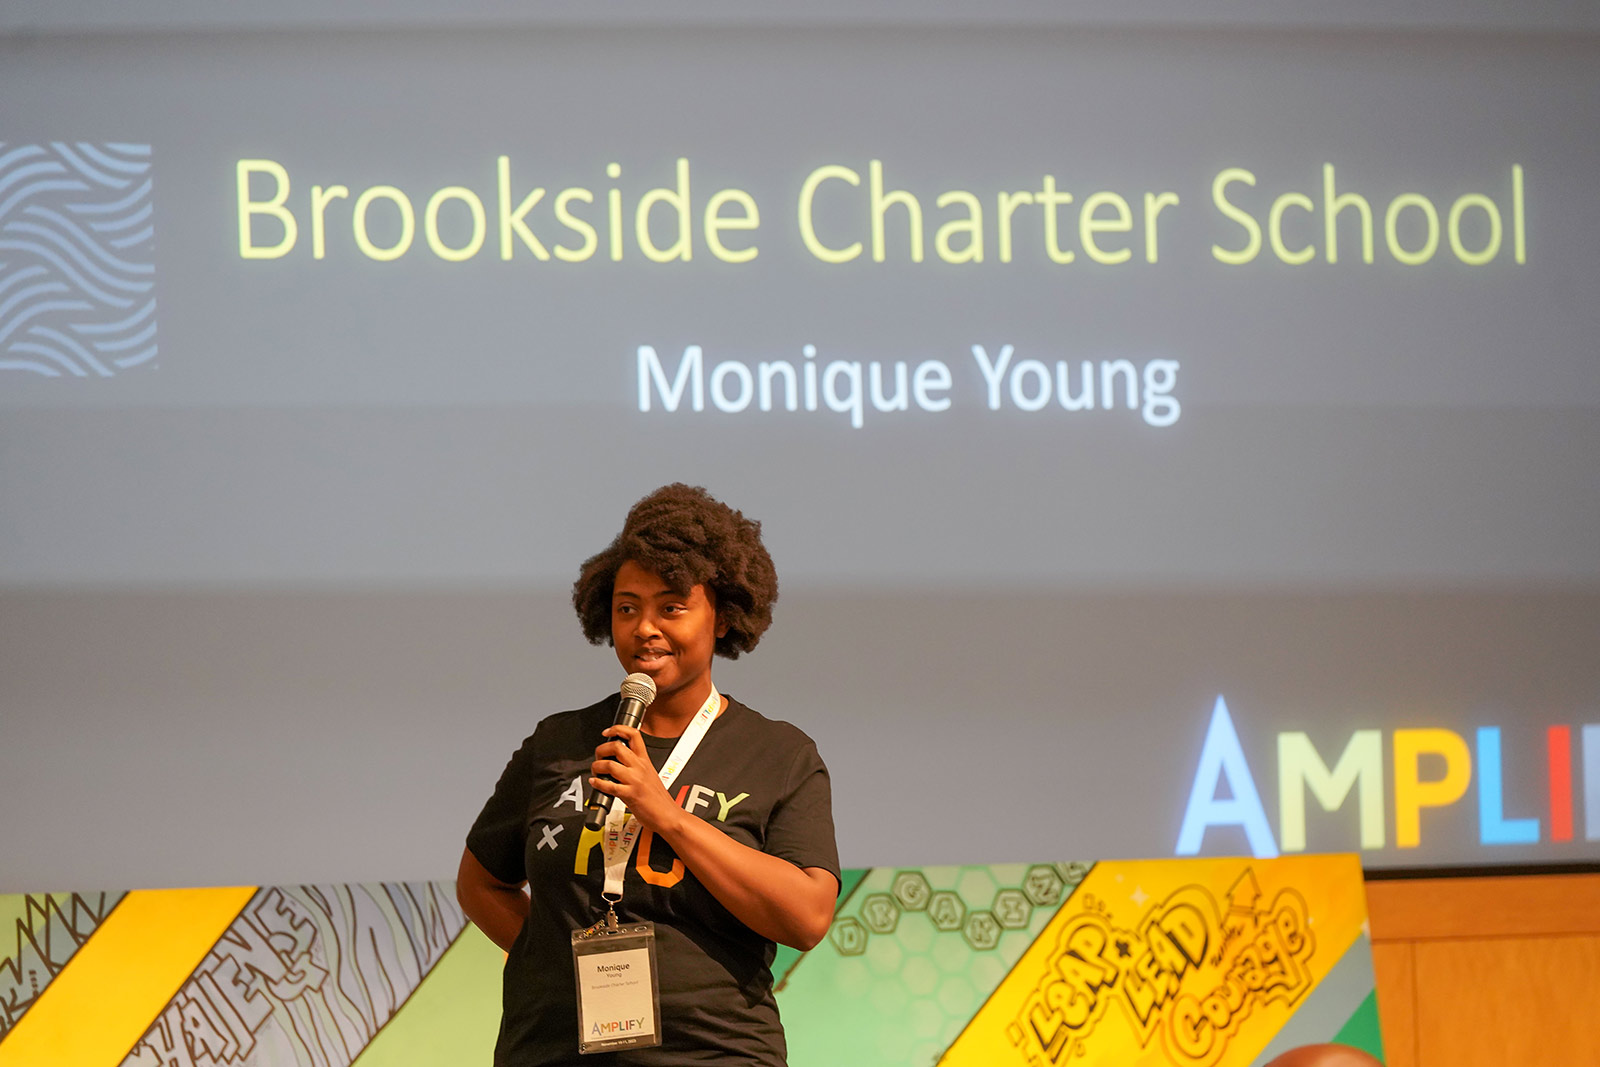 Monique Young from Brookside Charter School speaks during the 2023 Amplify Conference